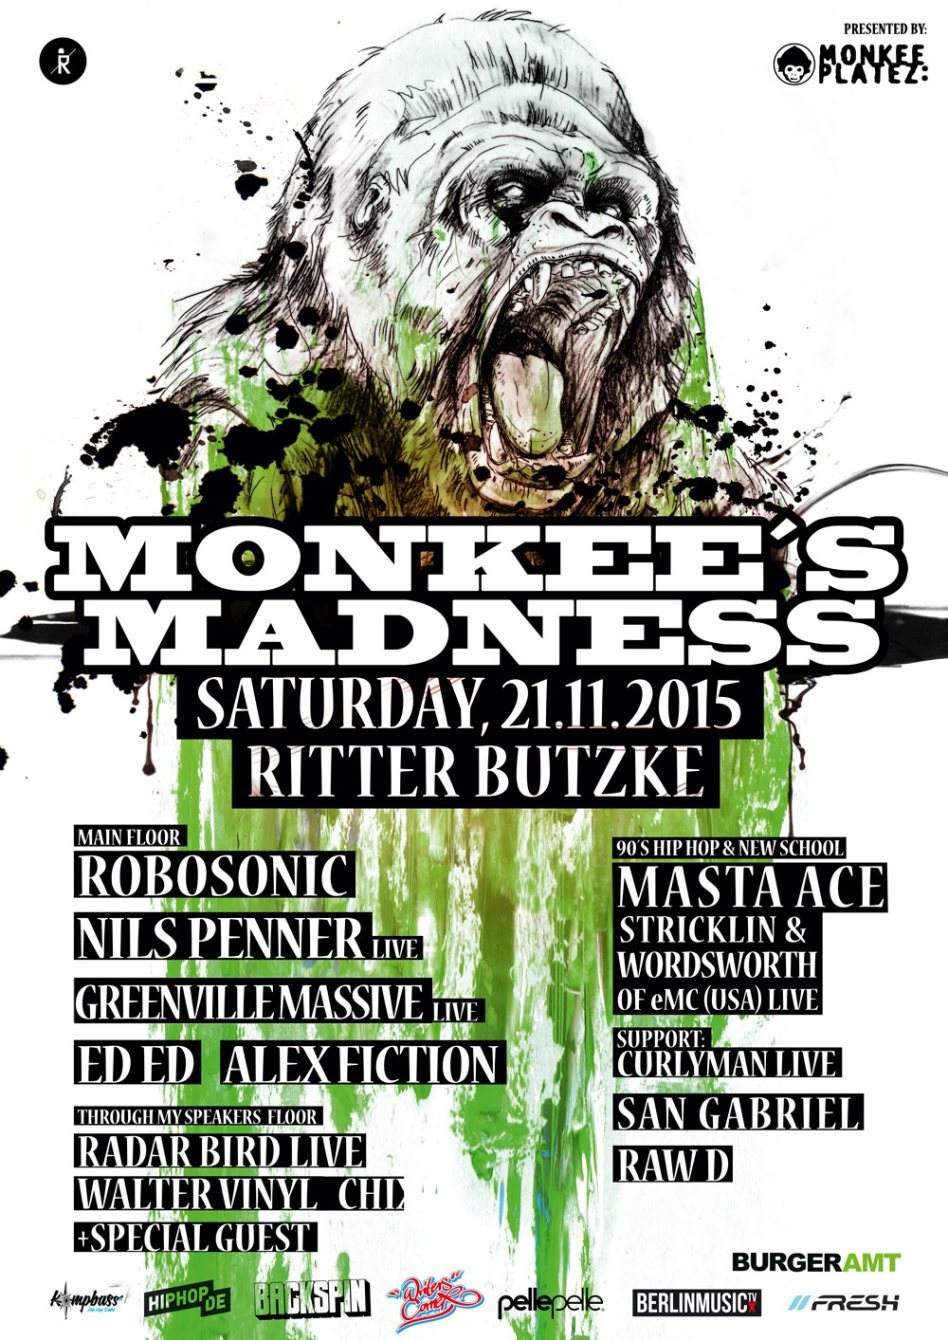 Monkees Madness with Masta ace, Robosonic, Nils Penner, ED ED, Alex Fiction, TMS - Página frontal